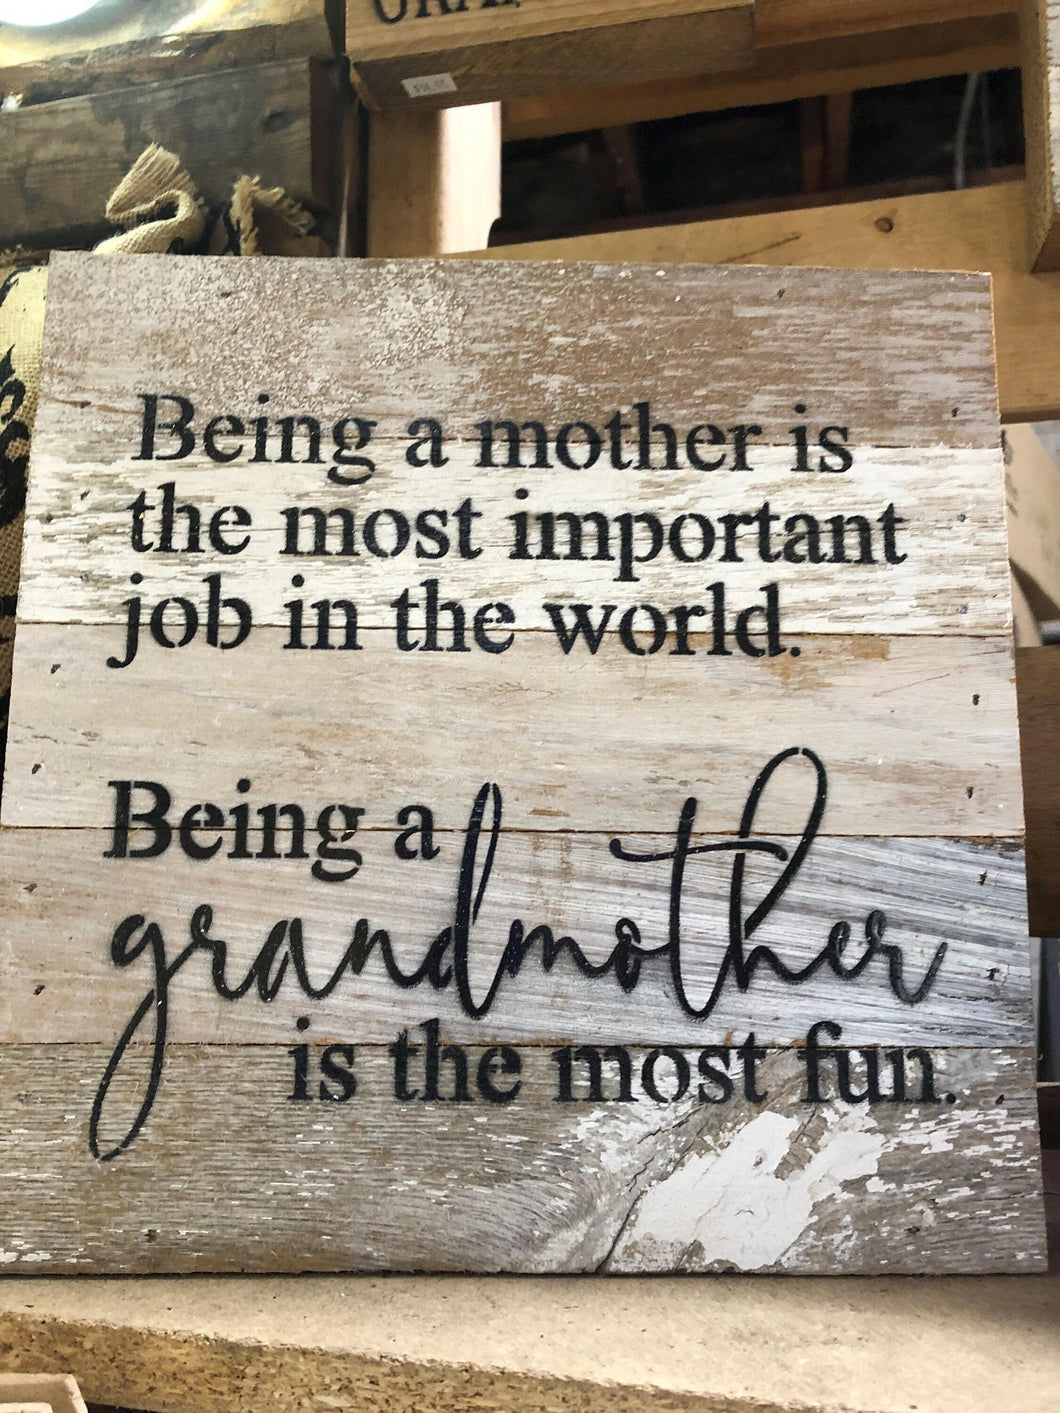 Being a grandmother is the most fun wall decor